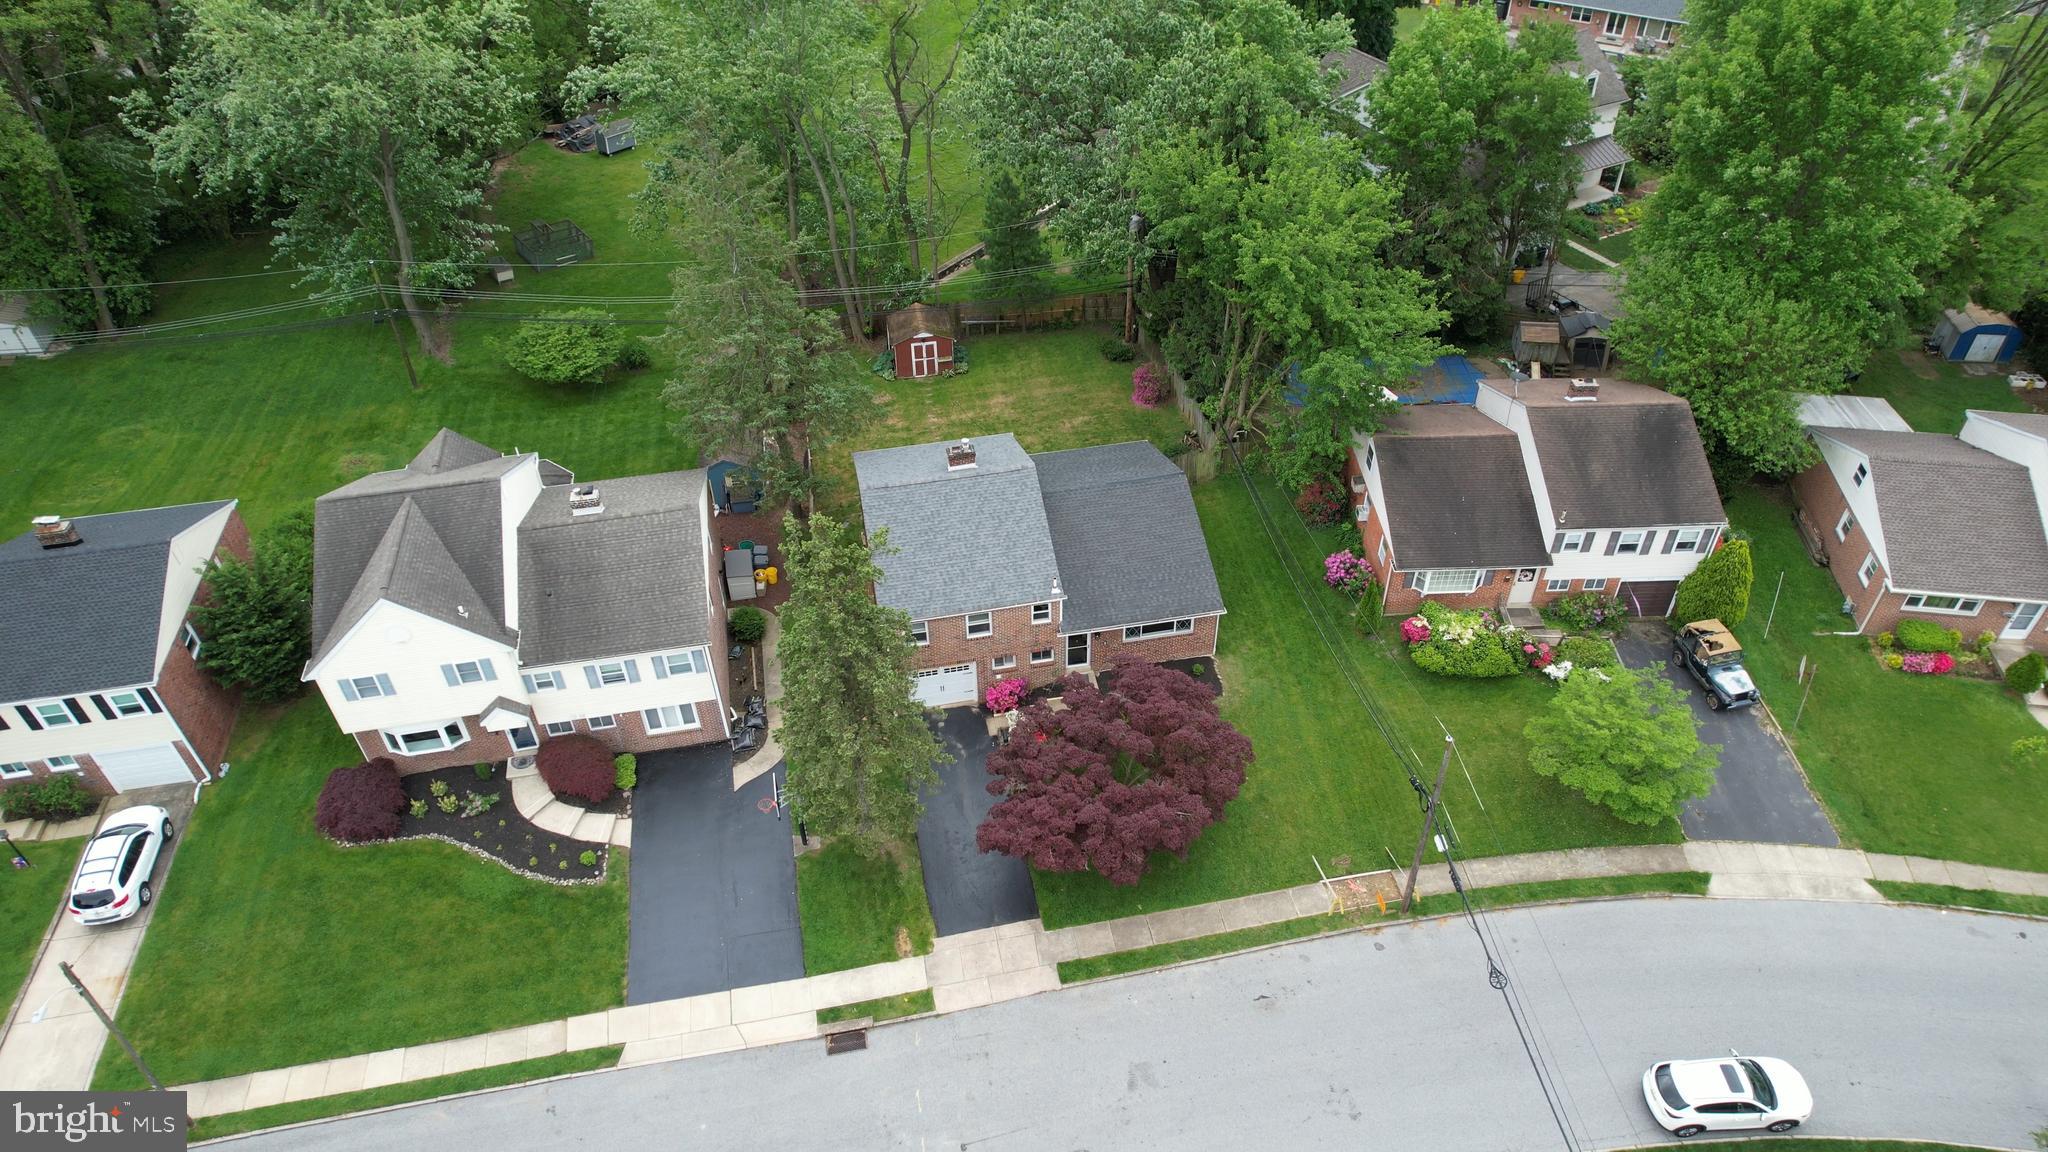 an aerial view of a house with outdoor space patio and garden